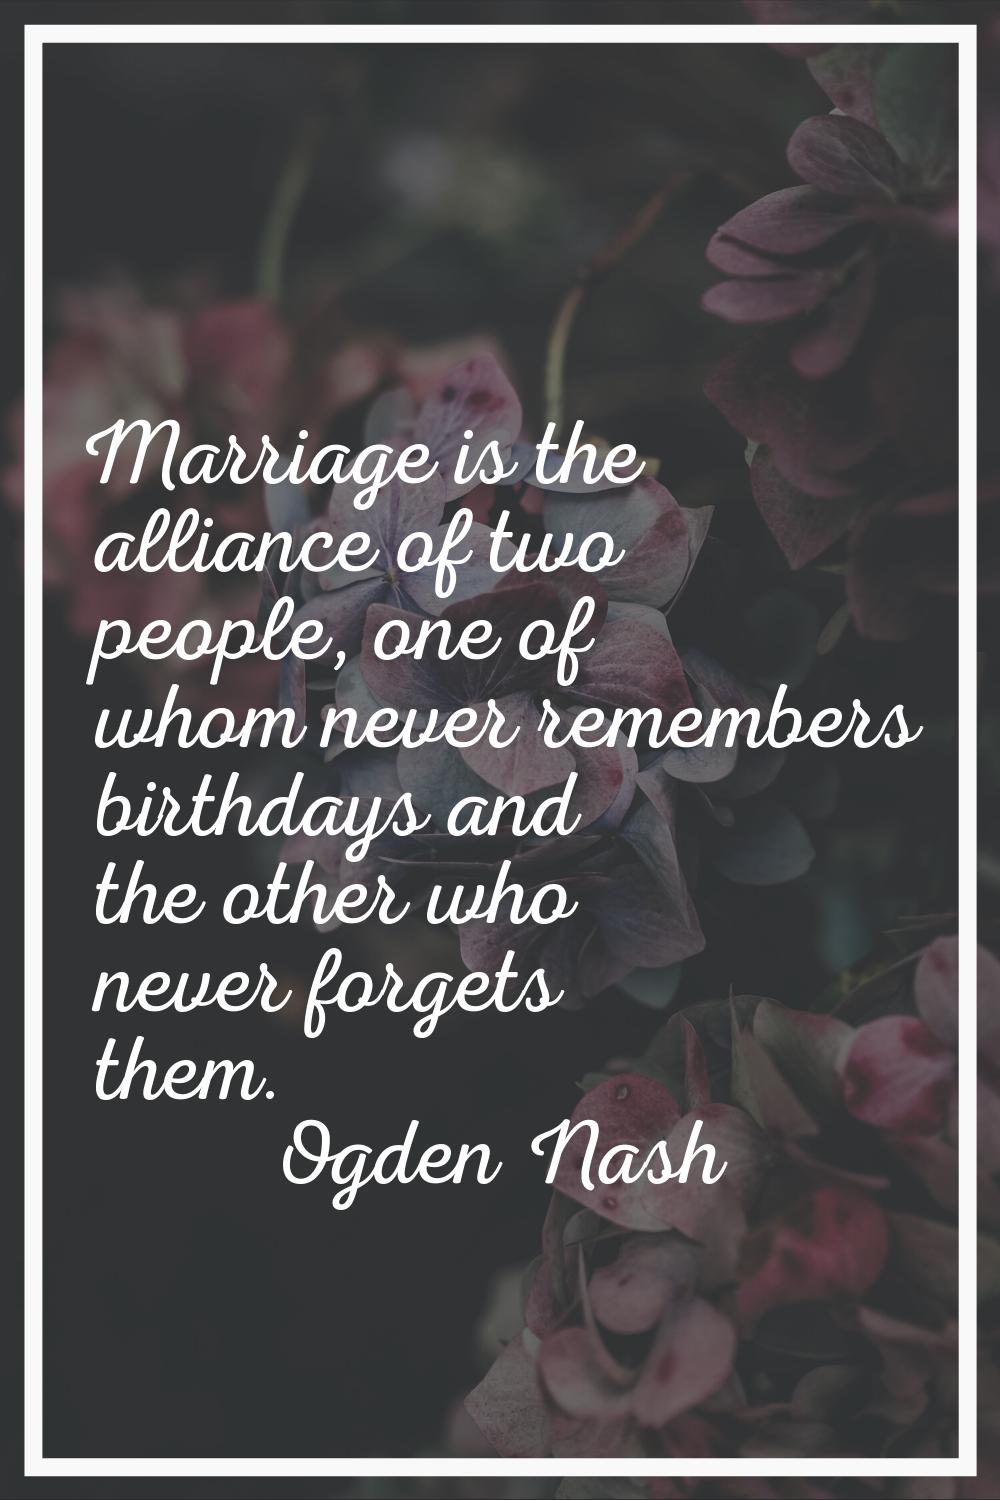 Marriage is the alliance of two people, one of whom never remembers birthdays and the other who nev